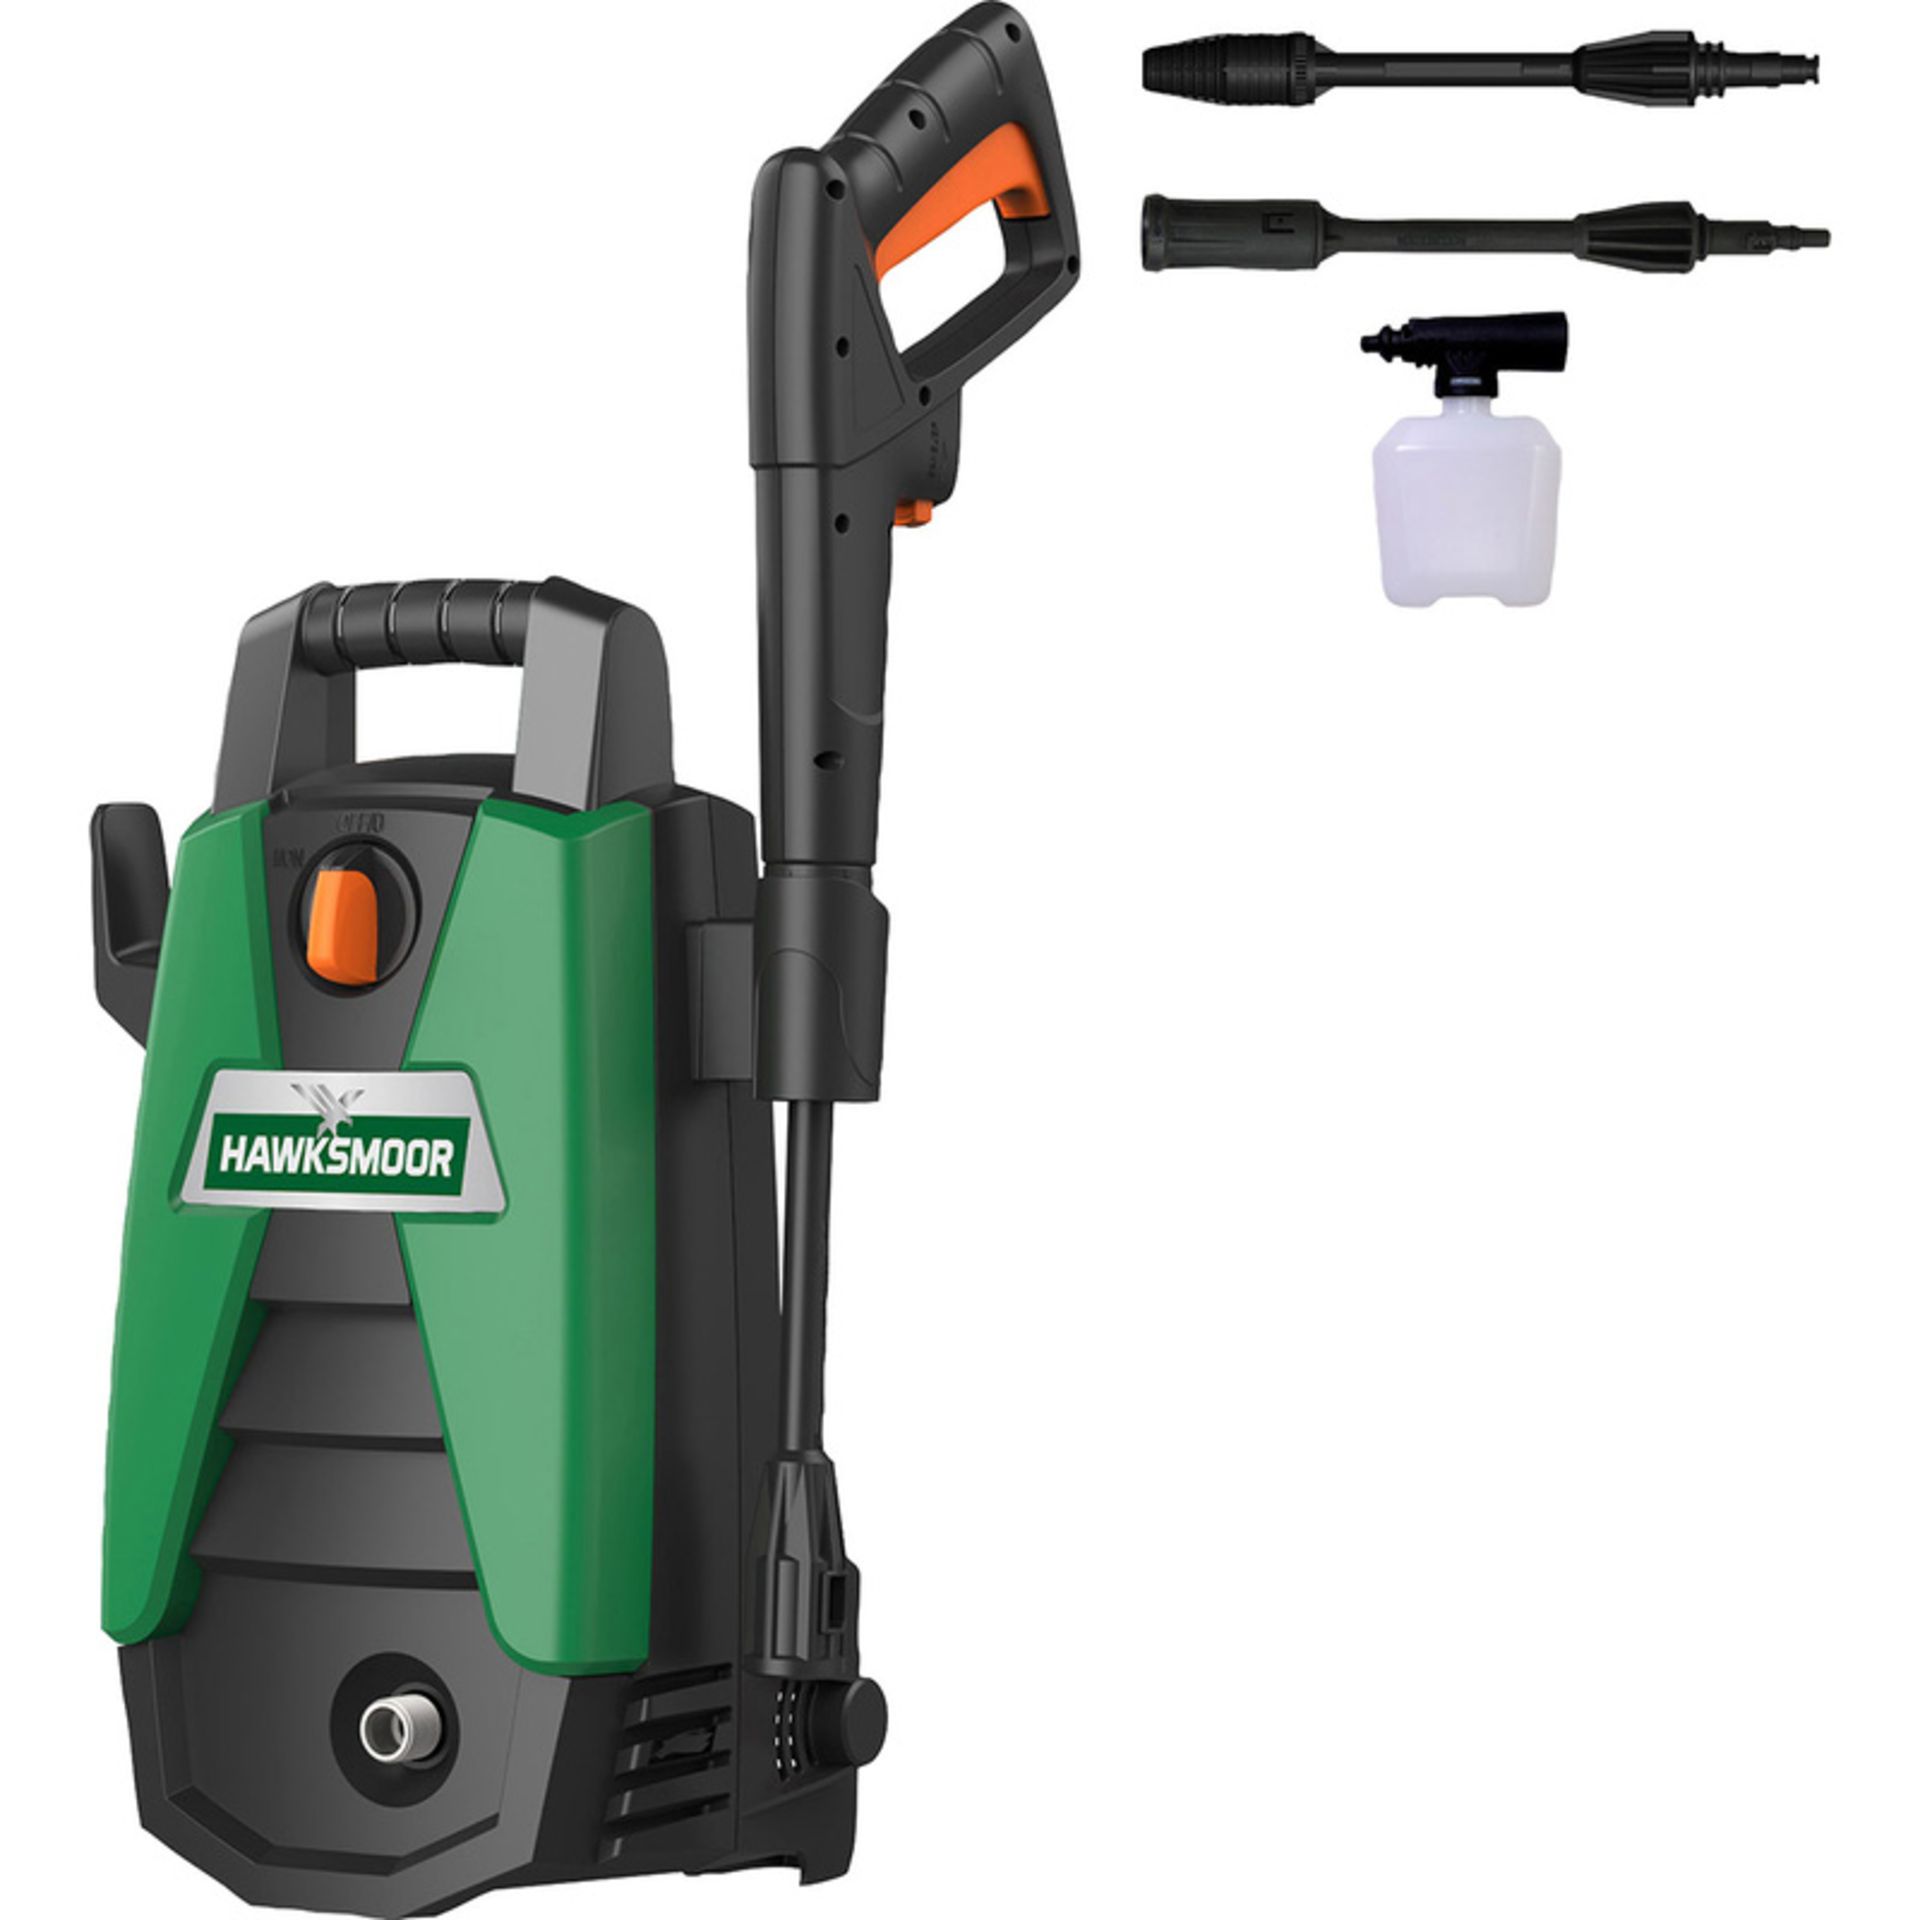 6 x Hawksmoor High Pressure Washer 108bar. - ER32. Features quick lock and release system for high